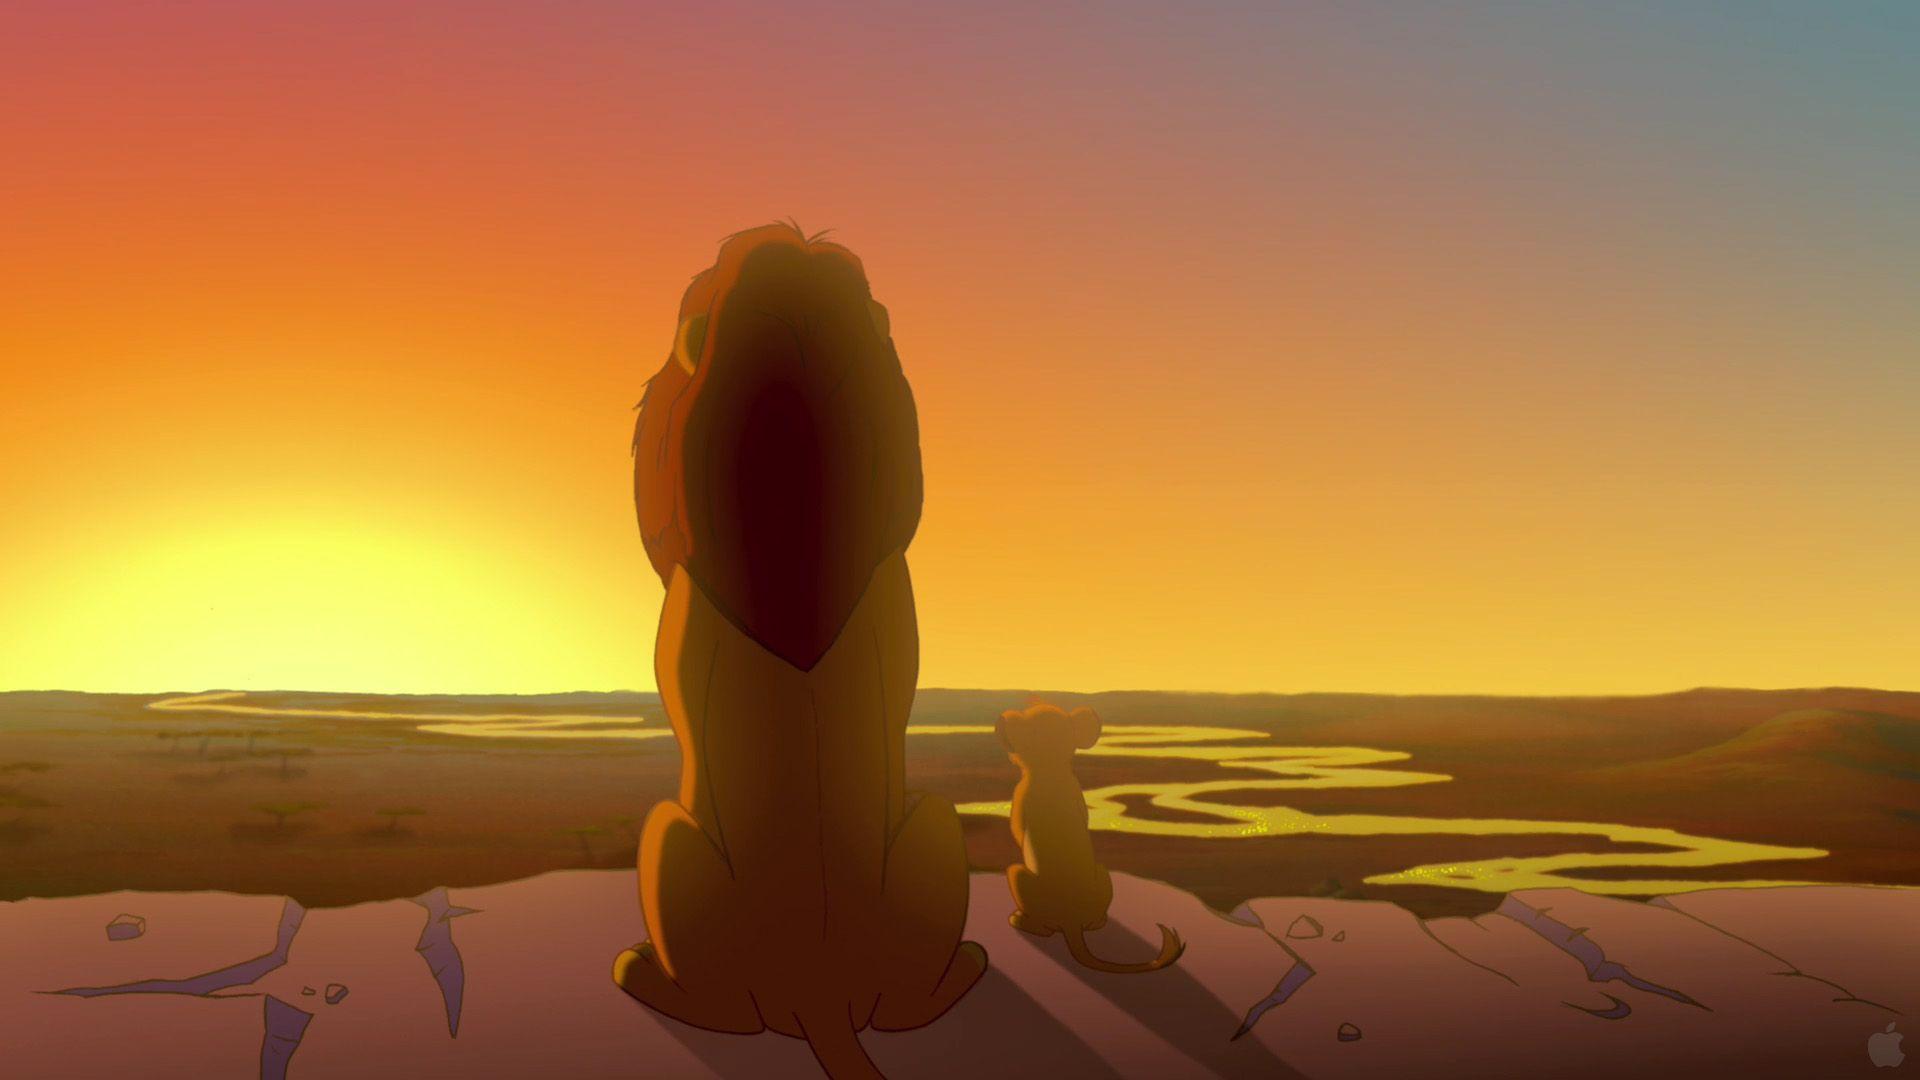 Lion King Wallpapers Hd